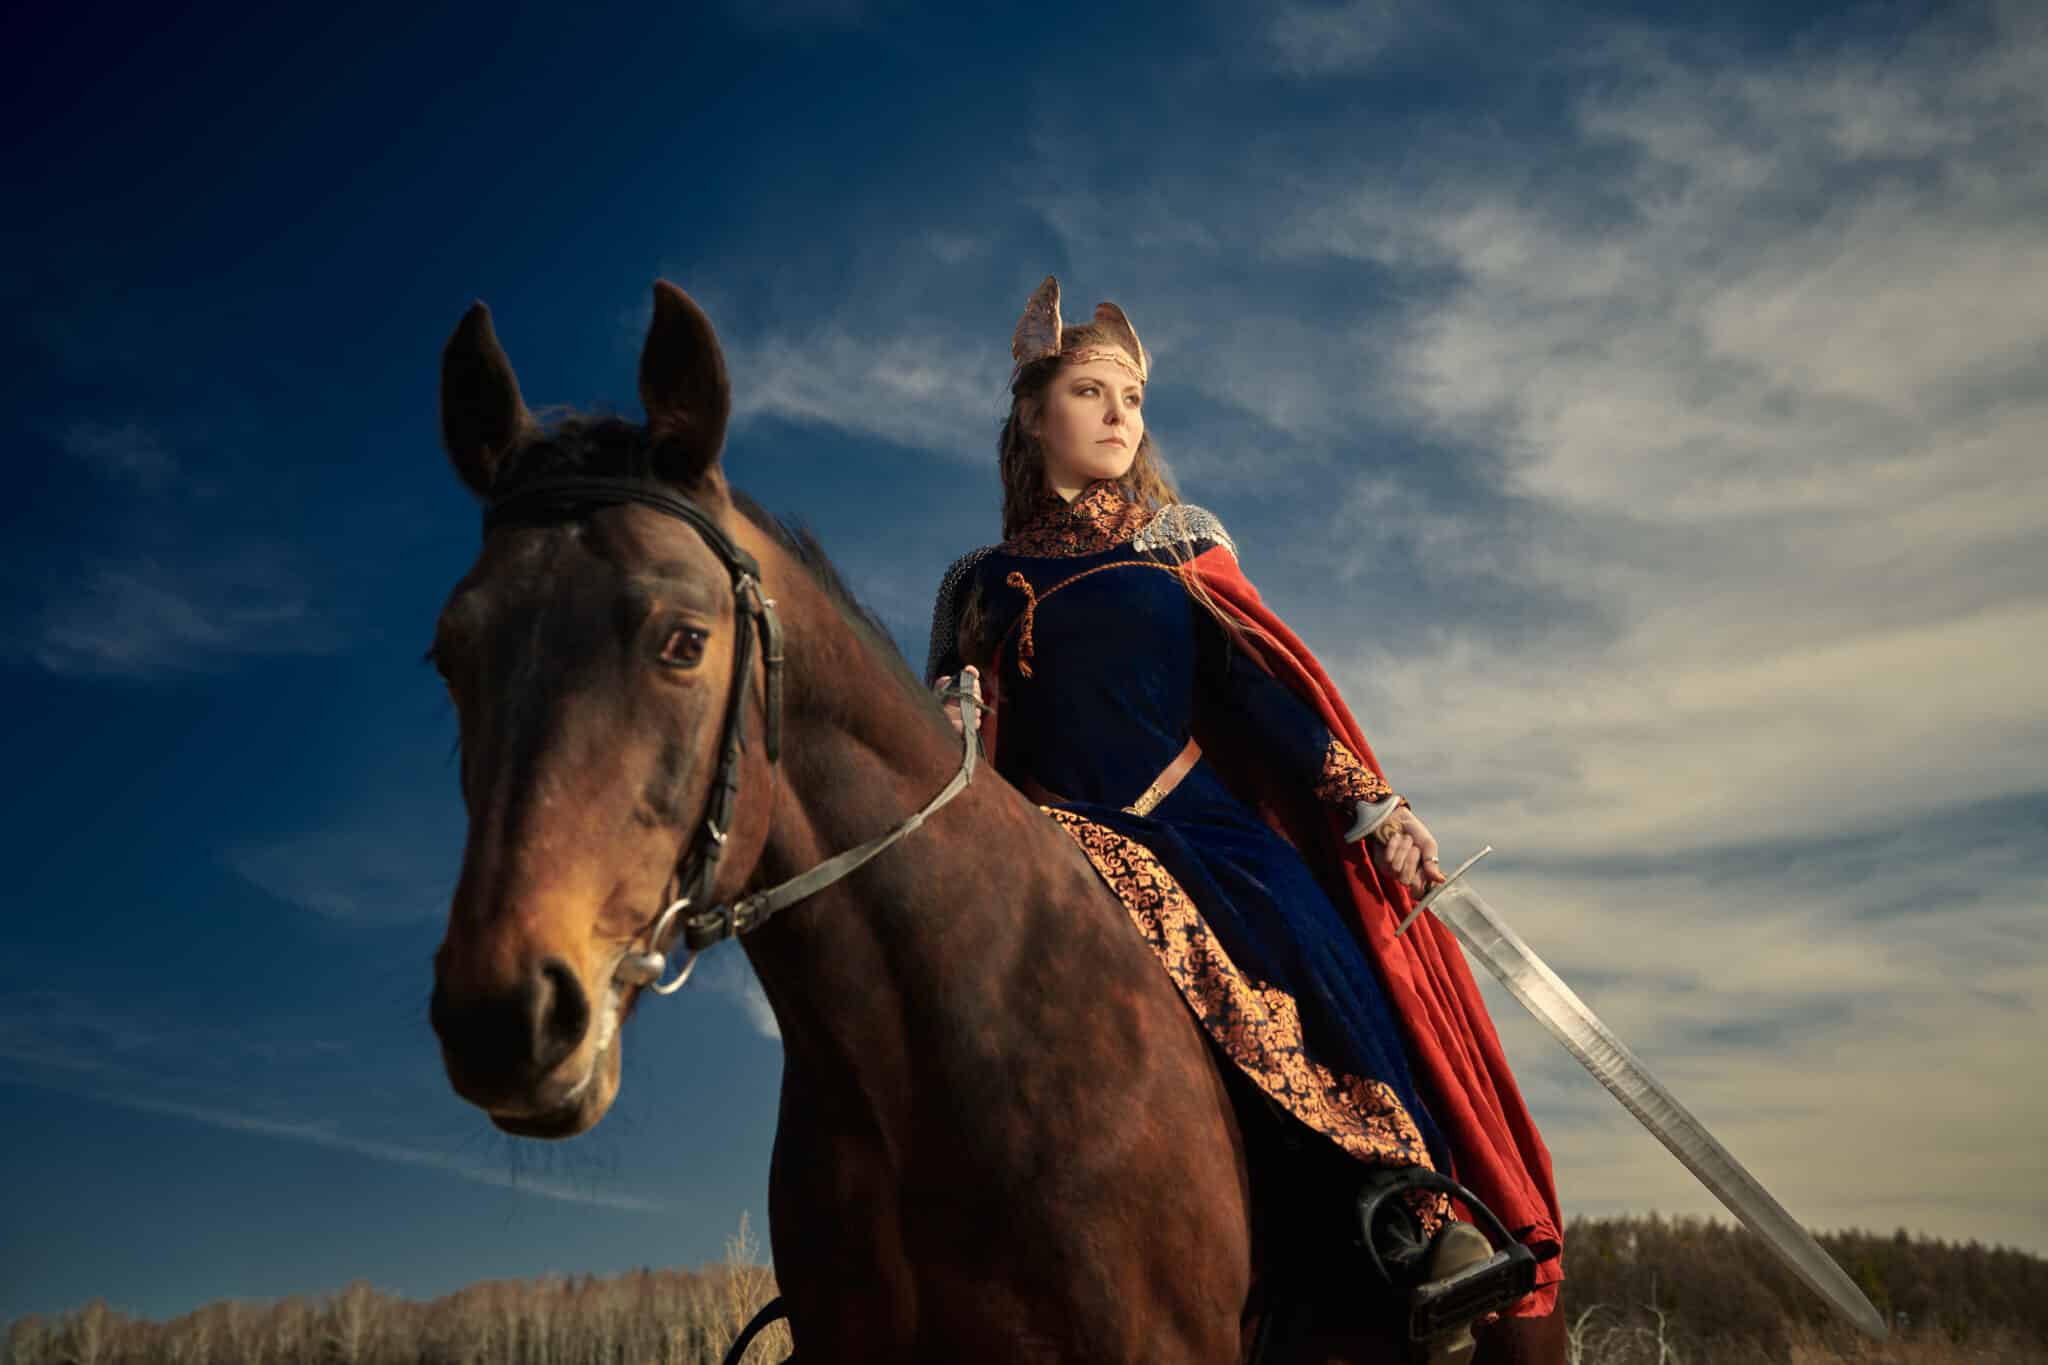 female medieval warrior holding a sword while riding a brown horse